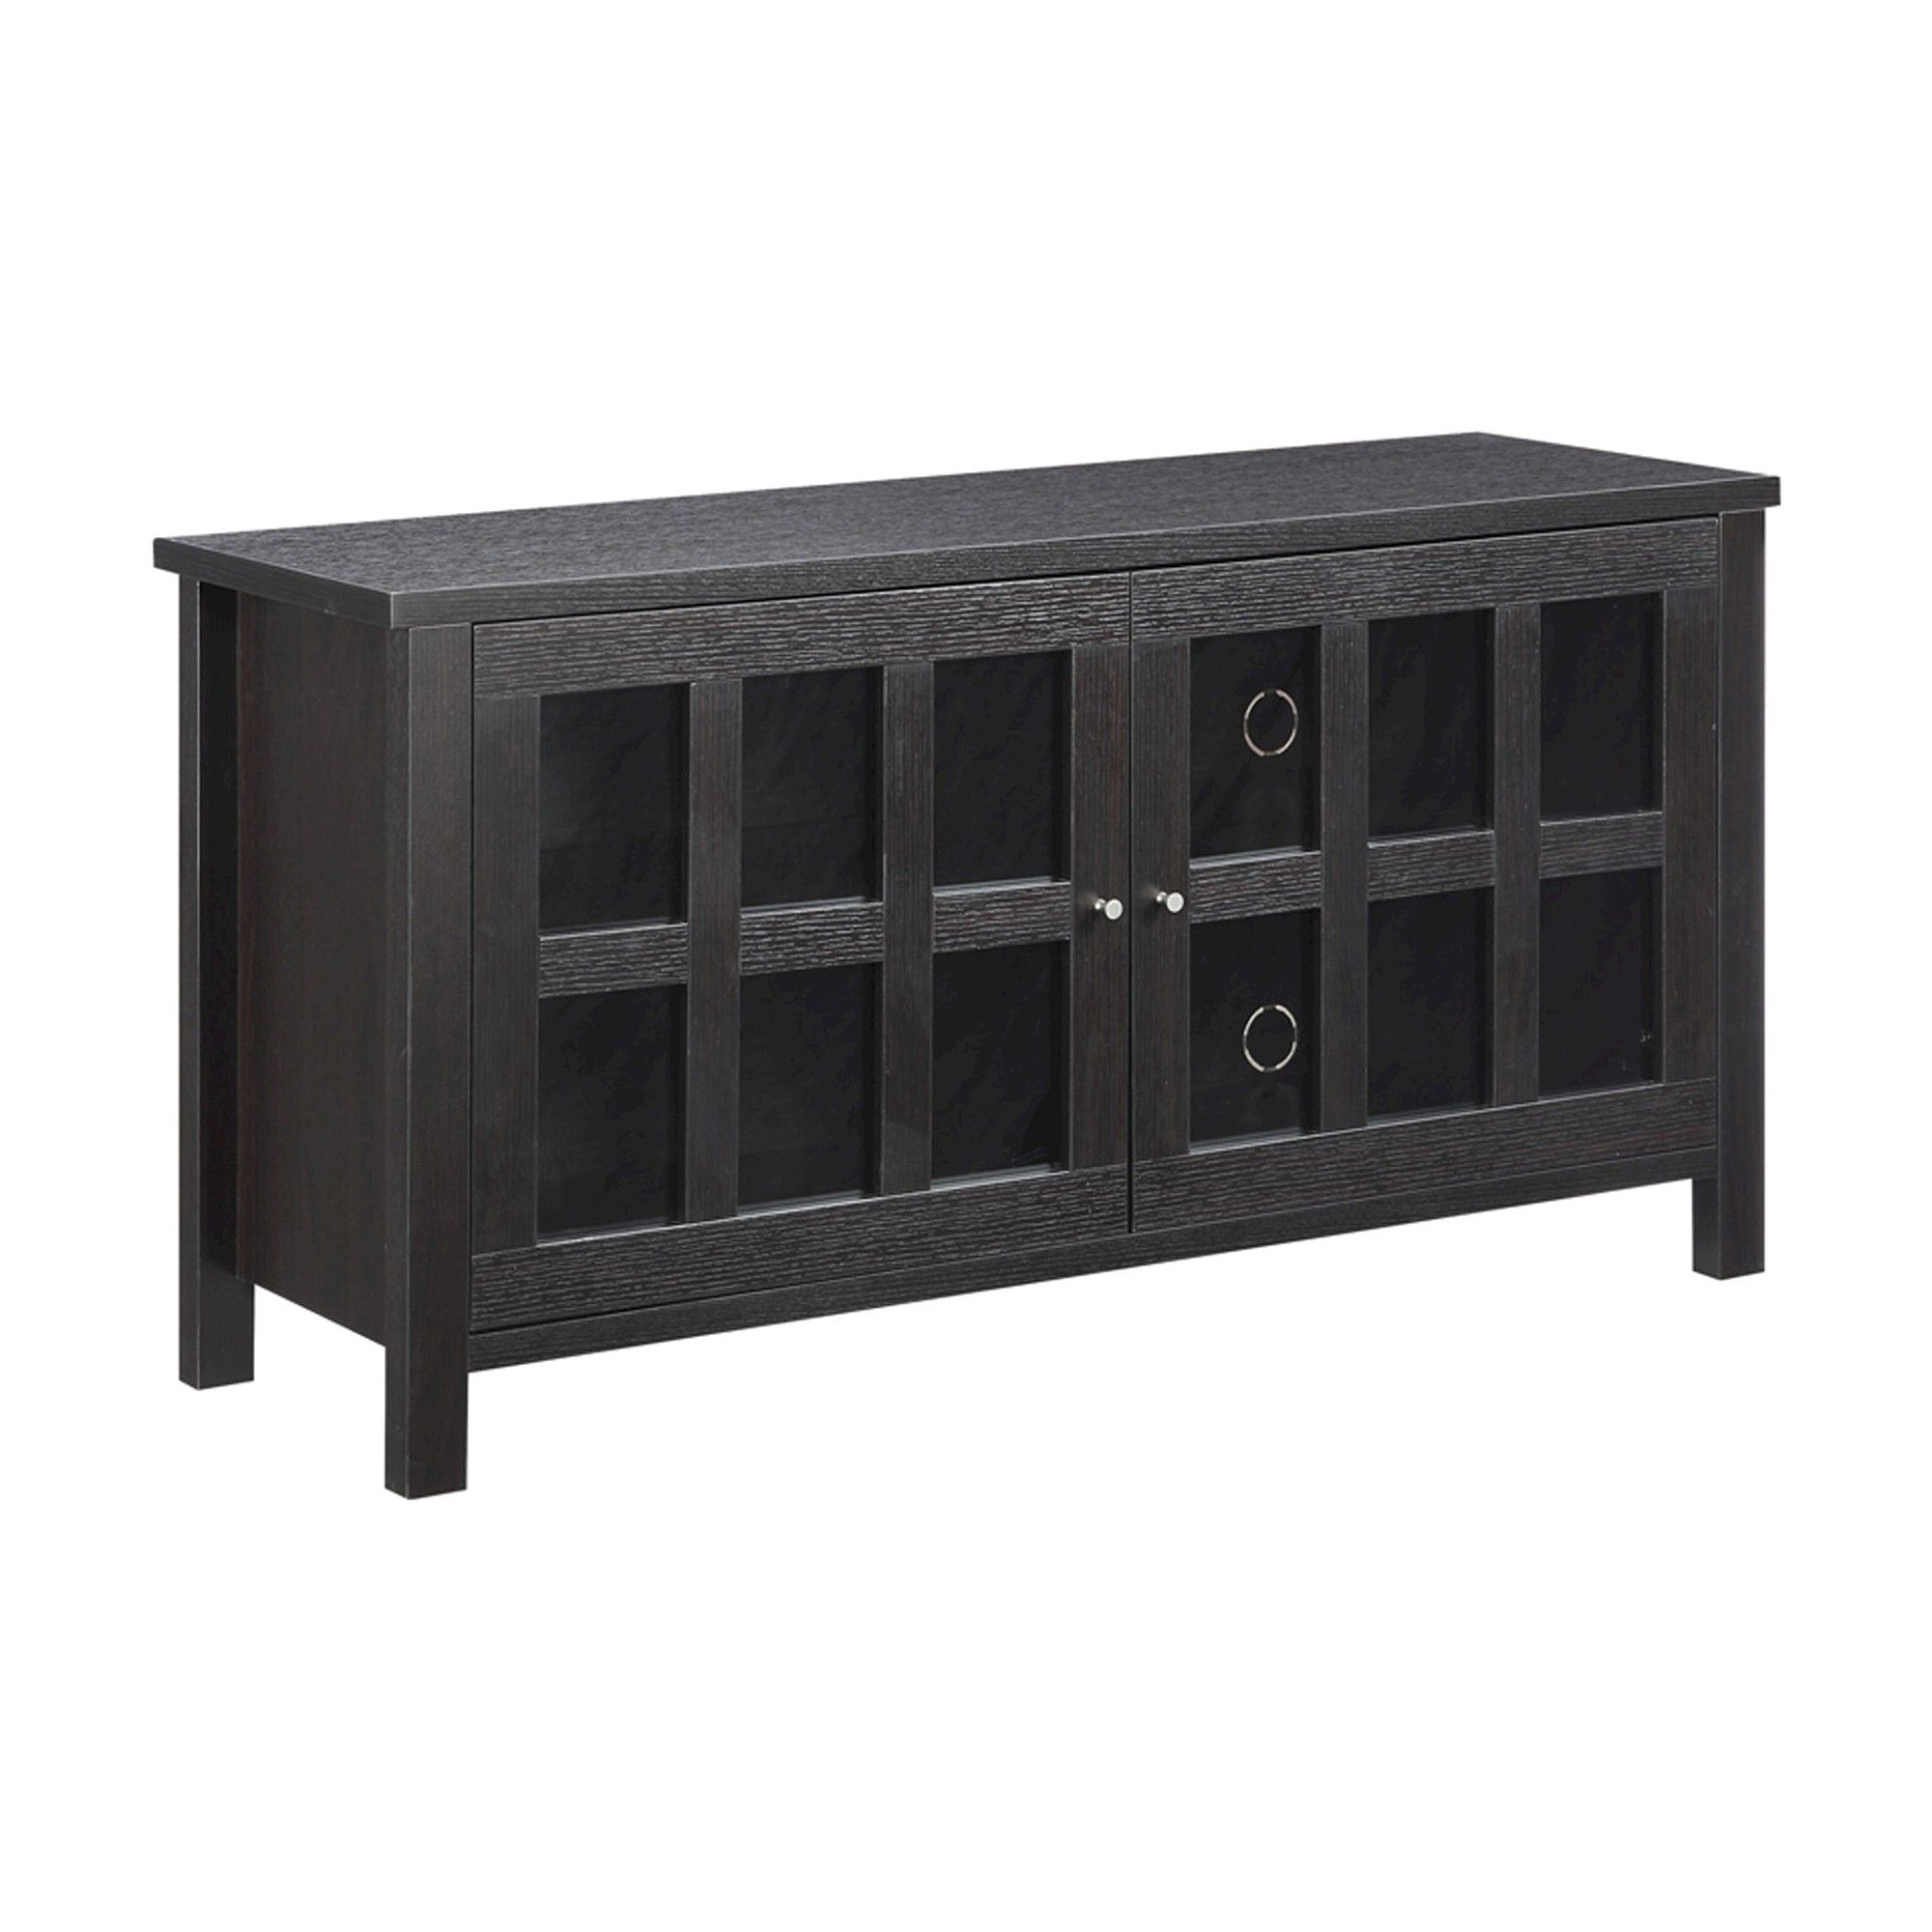 2018 Expresso Tv Stands Throughout Newport Bently Tv Stand – Espresso – Convenience Concepts, Brown (View 18 of 20)